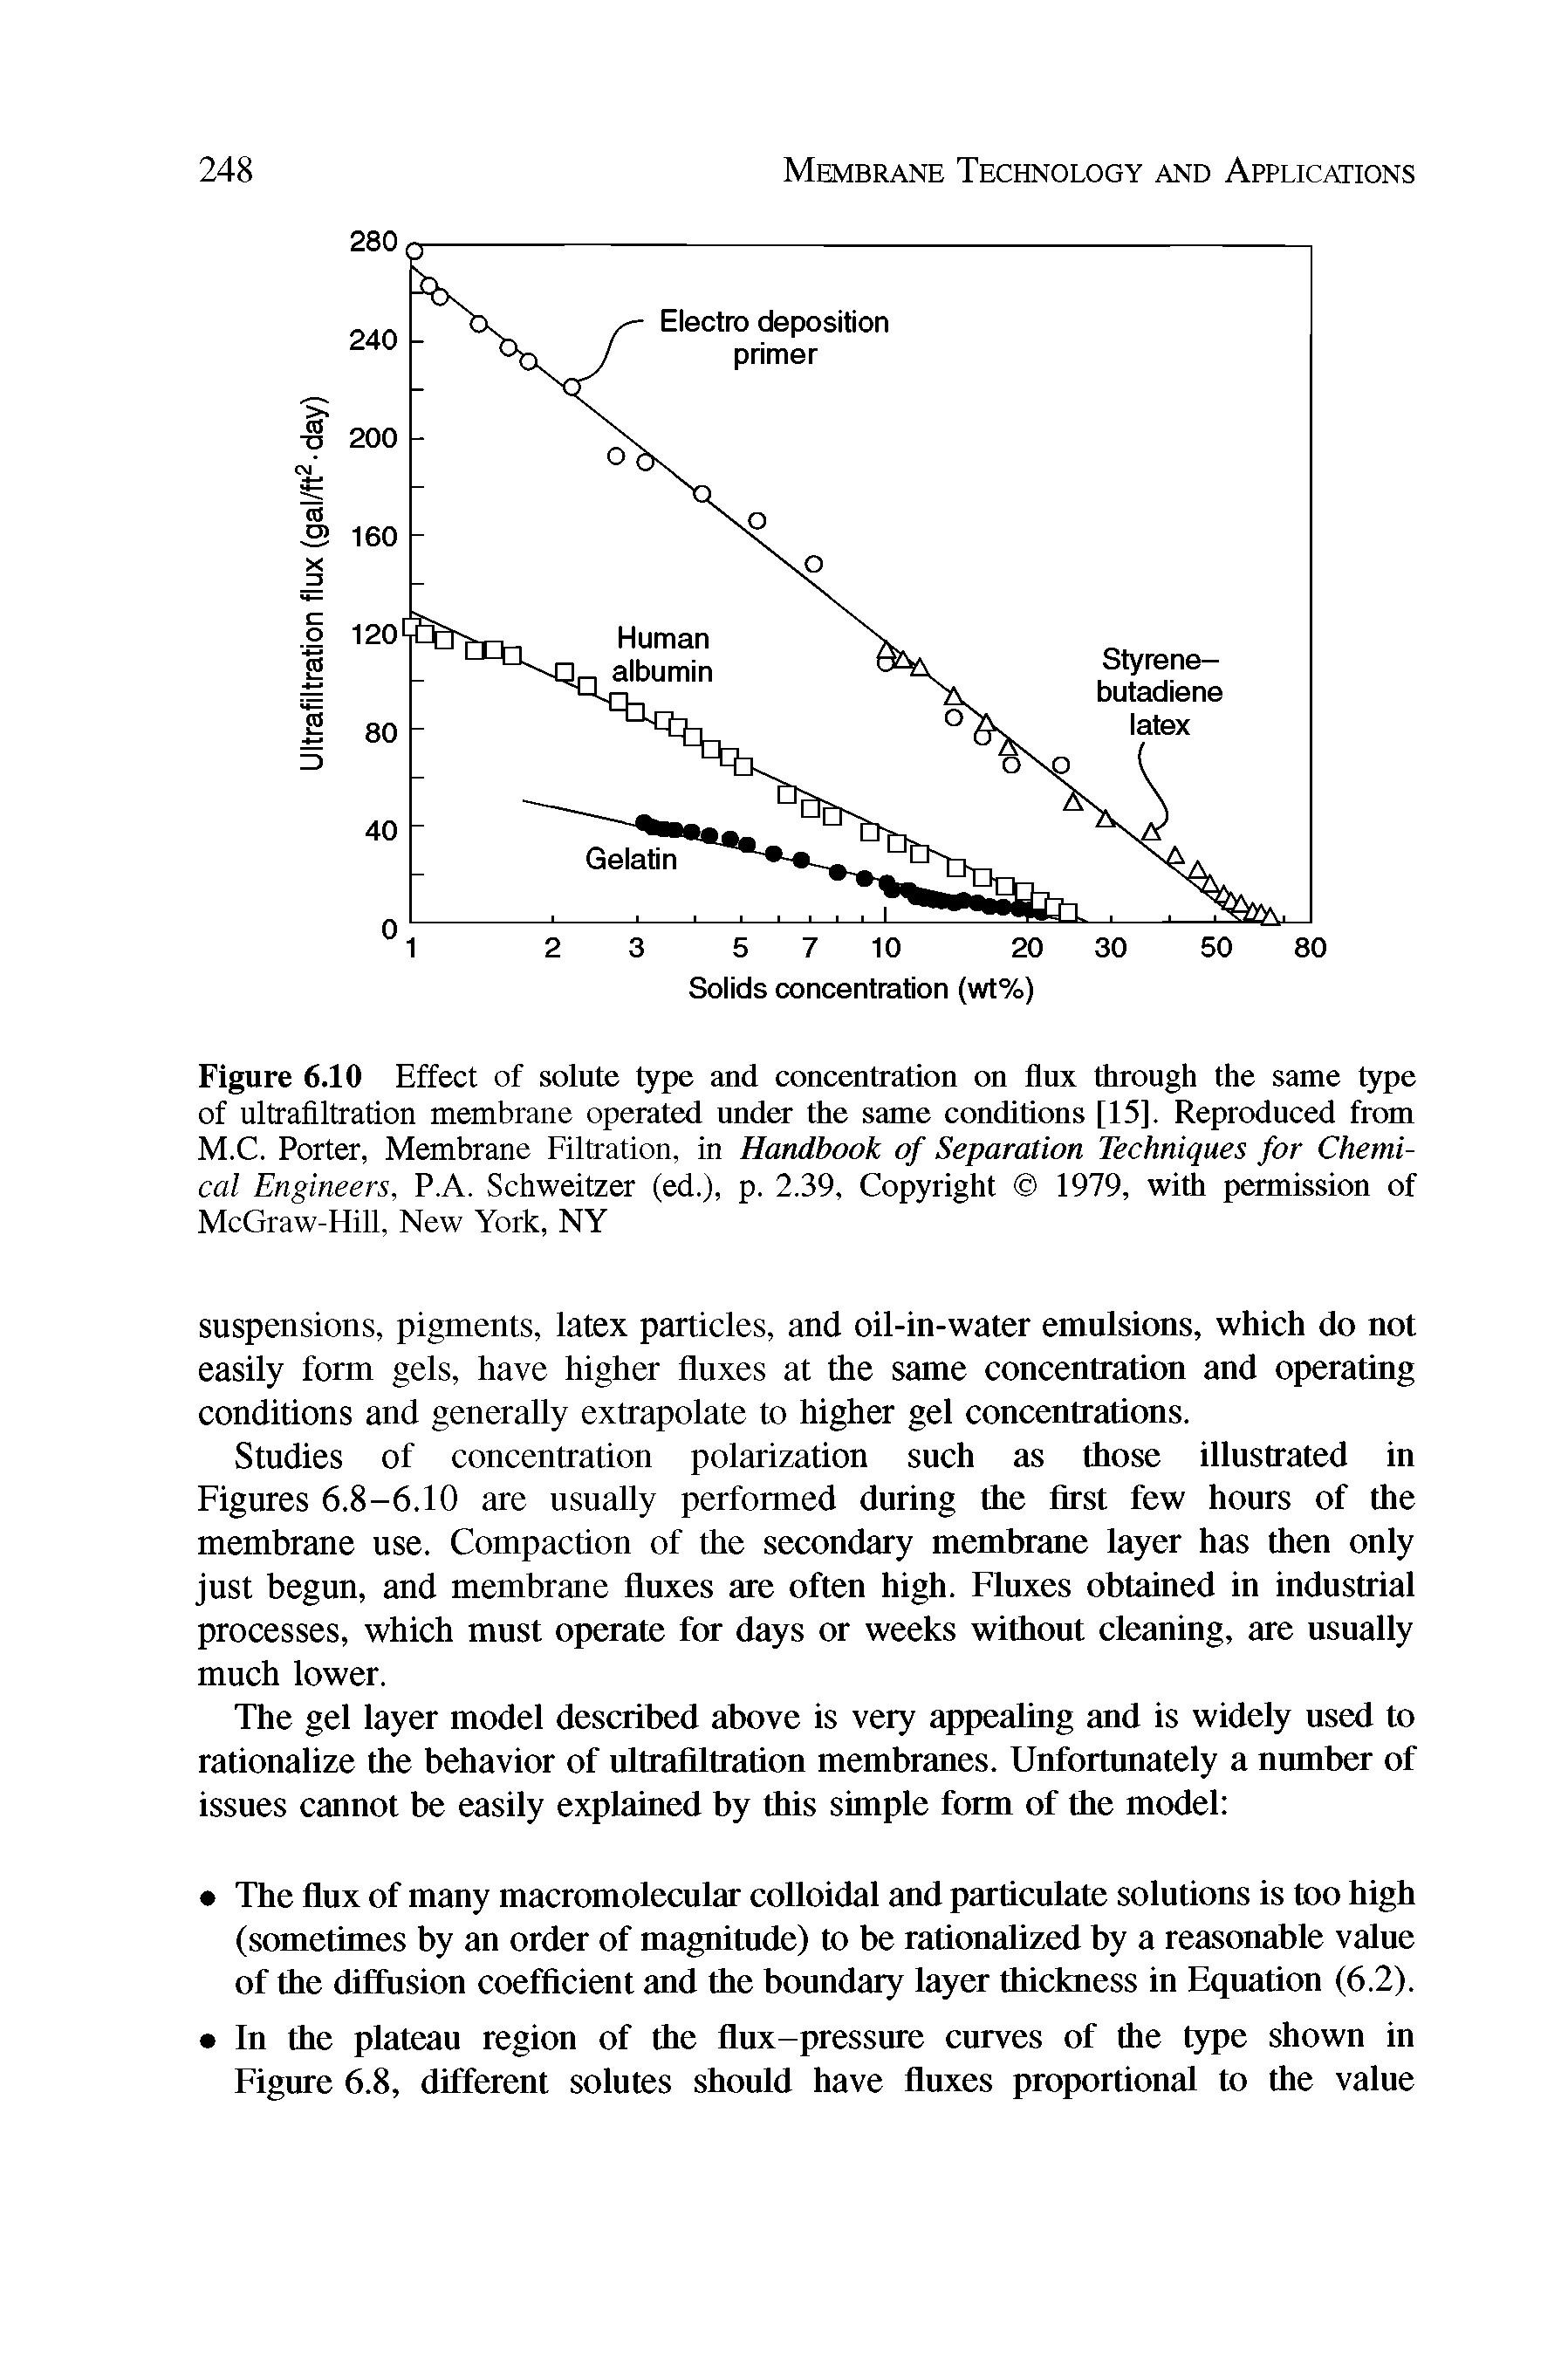 Figure 6.10 Effect of solute type and concentration on flux through the same type of ultrafiltration membrane operated under the same conditions [15]. Reproduced from M.C. Porter, Membrane Filtration, in Handbook of Separation Techniques for Chemical Engineers, P.A. Schweitzer (ed.), p. 2.39, Copyright 1979, with permission of McGraw-Hill, New York, NY...